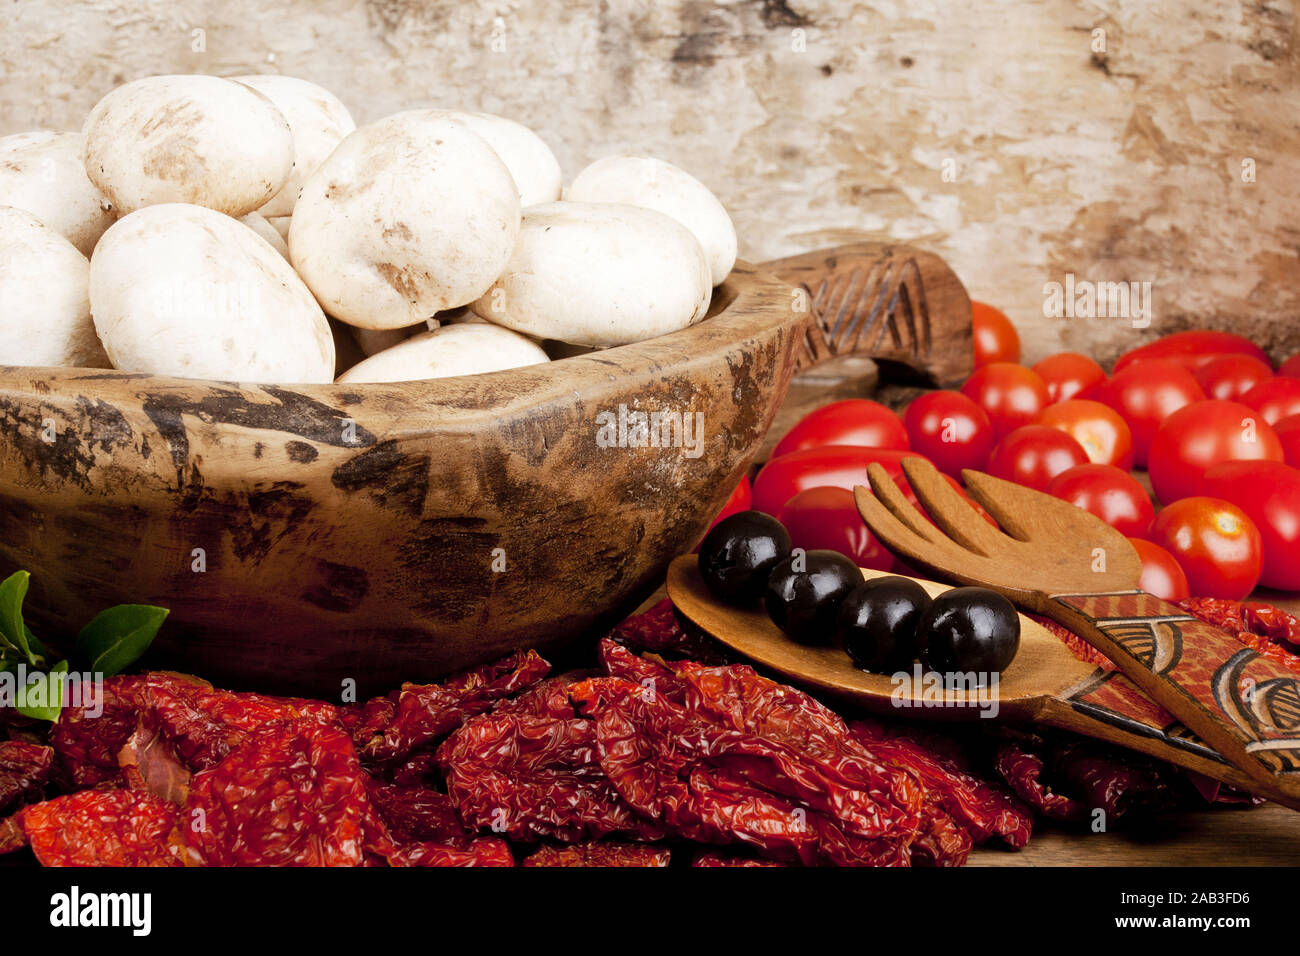 Tomaten mit Champions und Oliven |Tomatoes with mushrooms and olives| Stock Photo